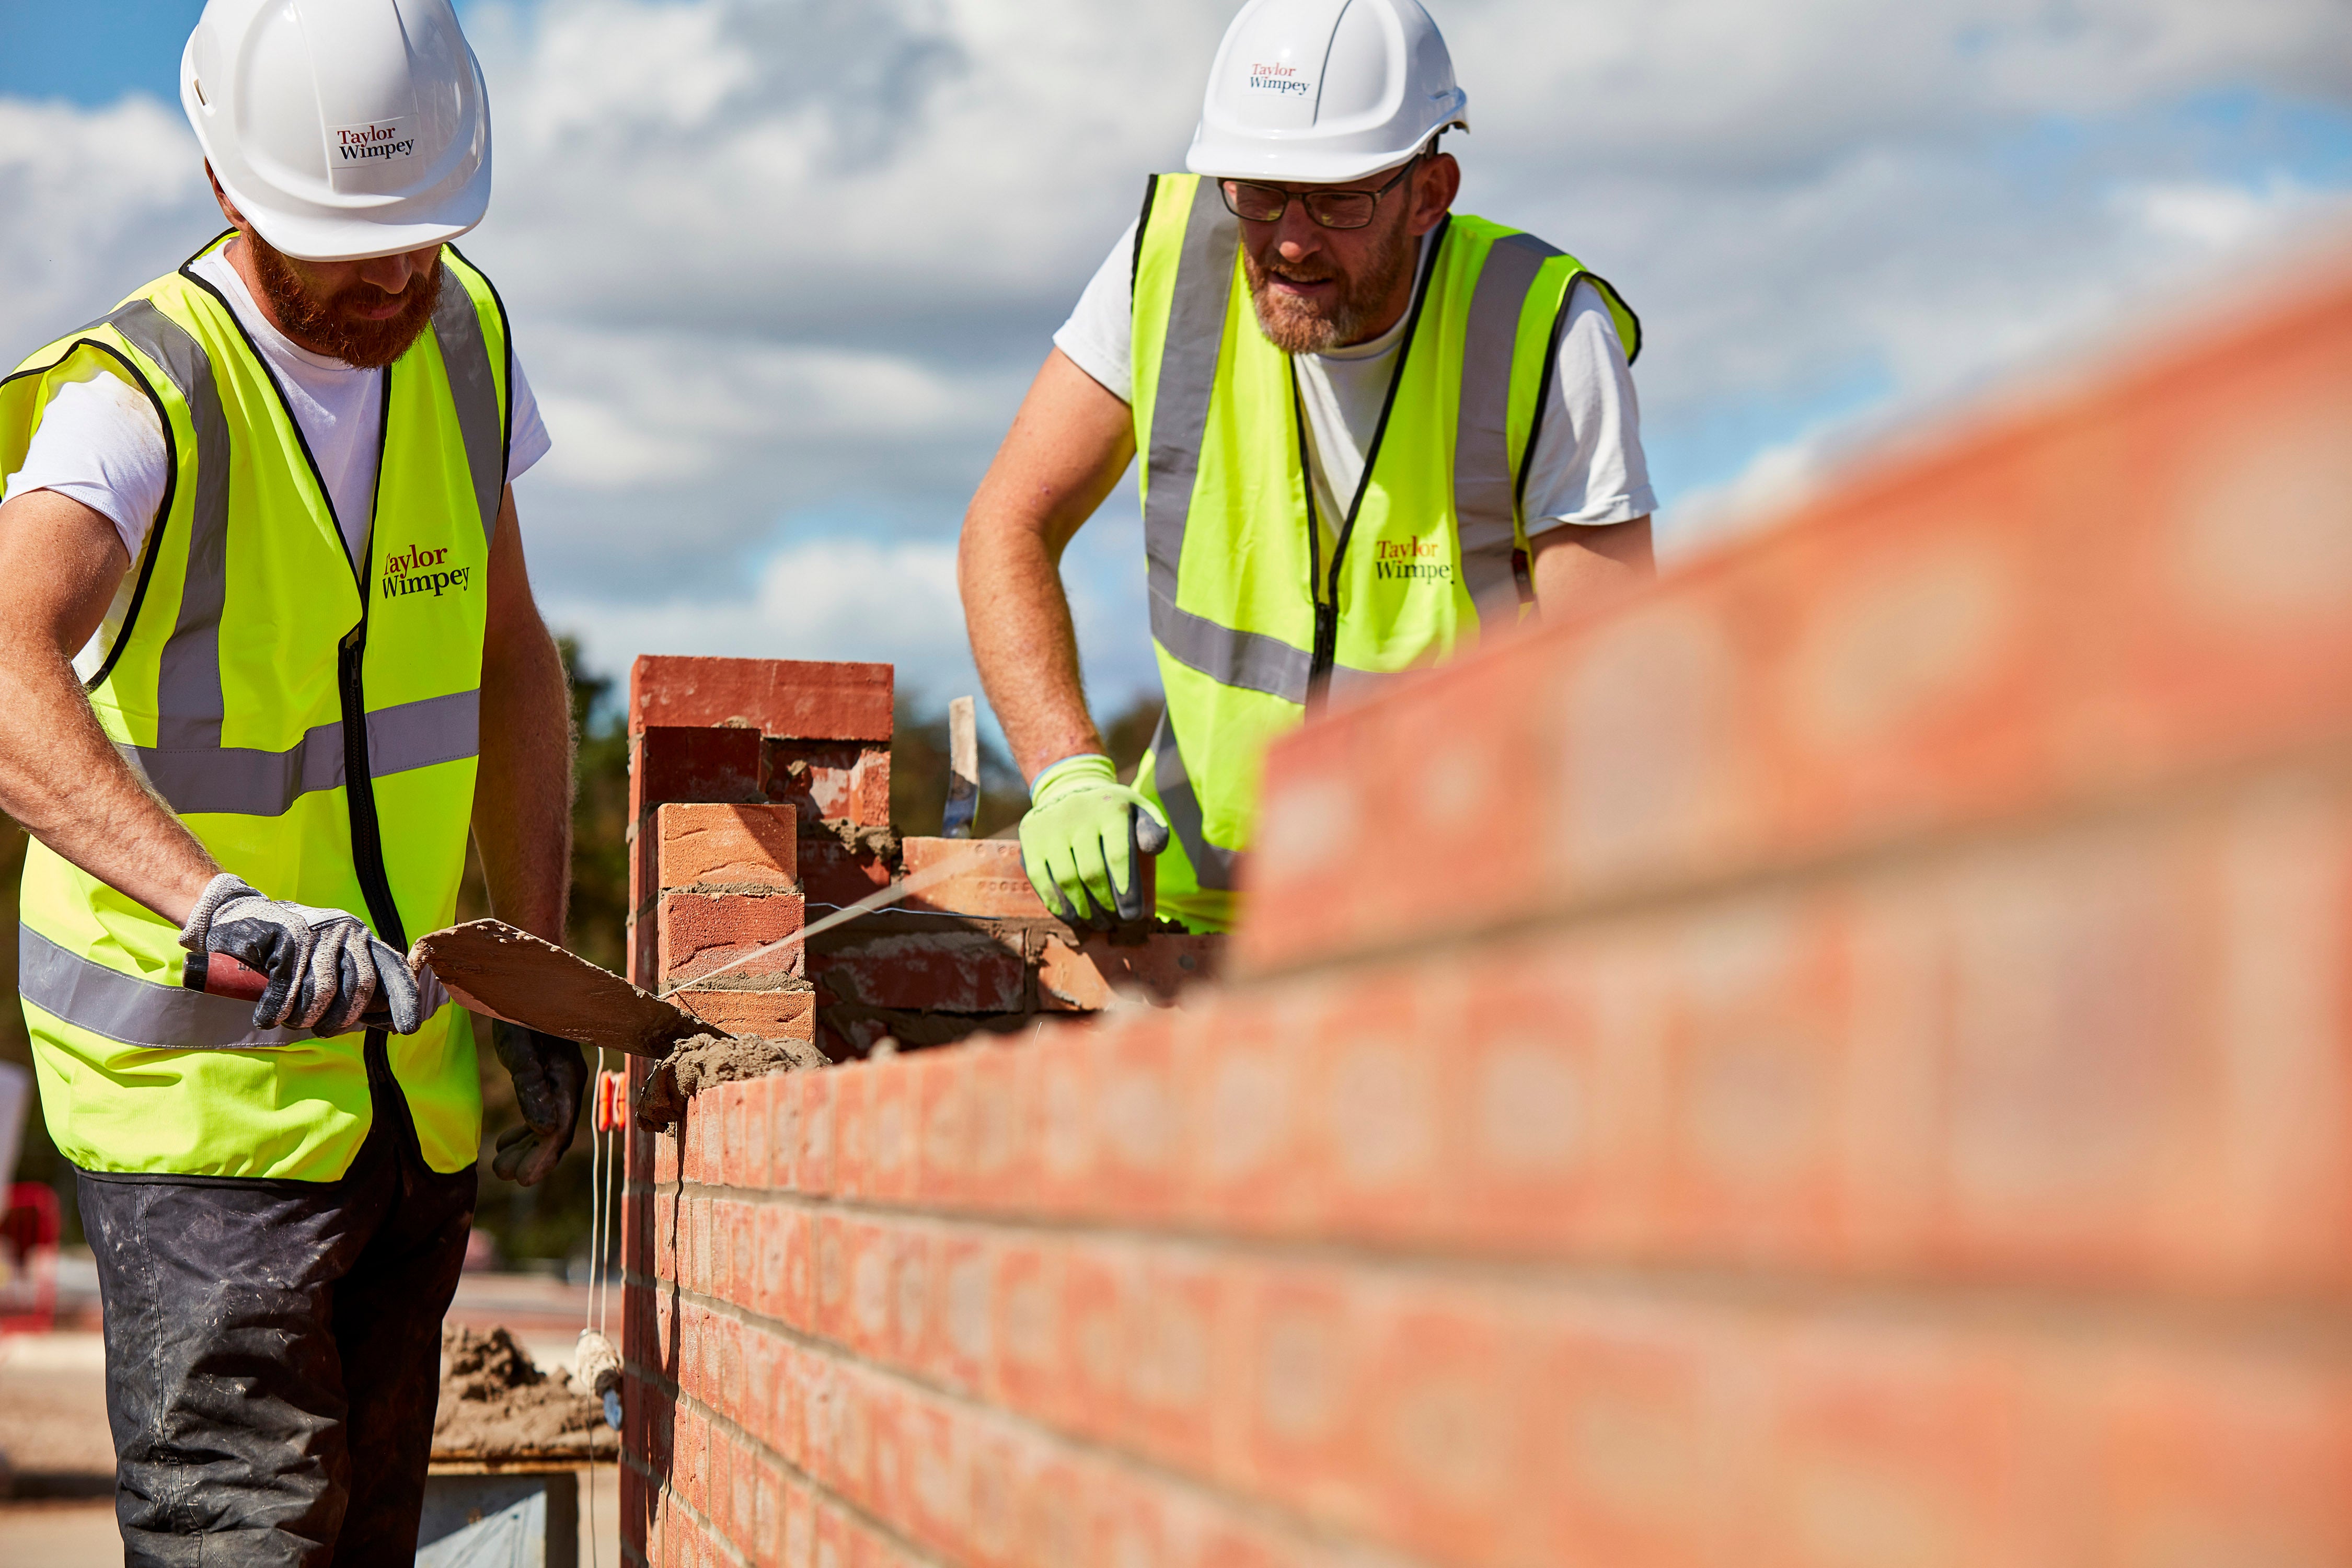 Housebuilding giant Taylor Wimpey has raised its full-year earnings outlook after swinging to a first-half profit amid Britain’s booming property market.